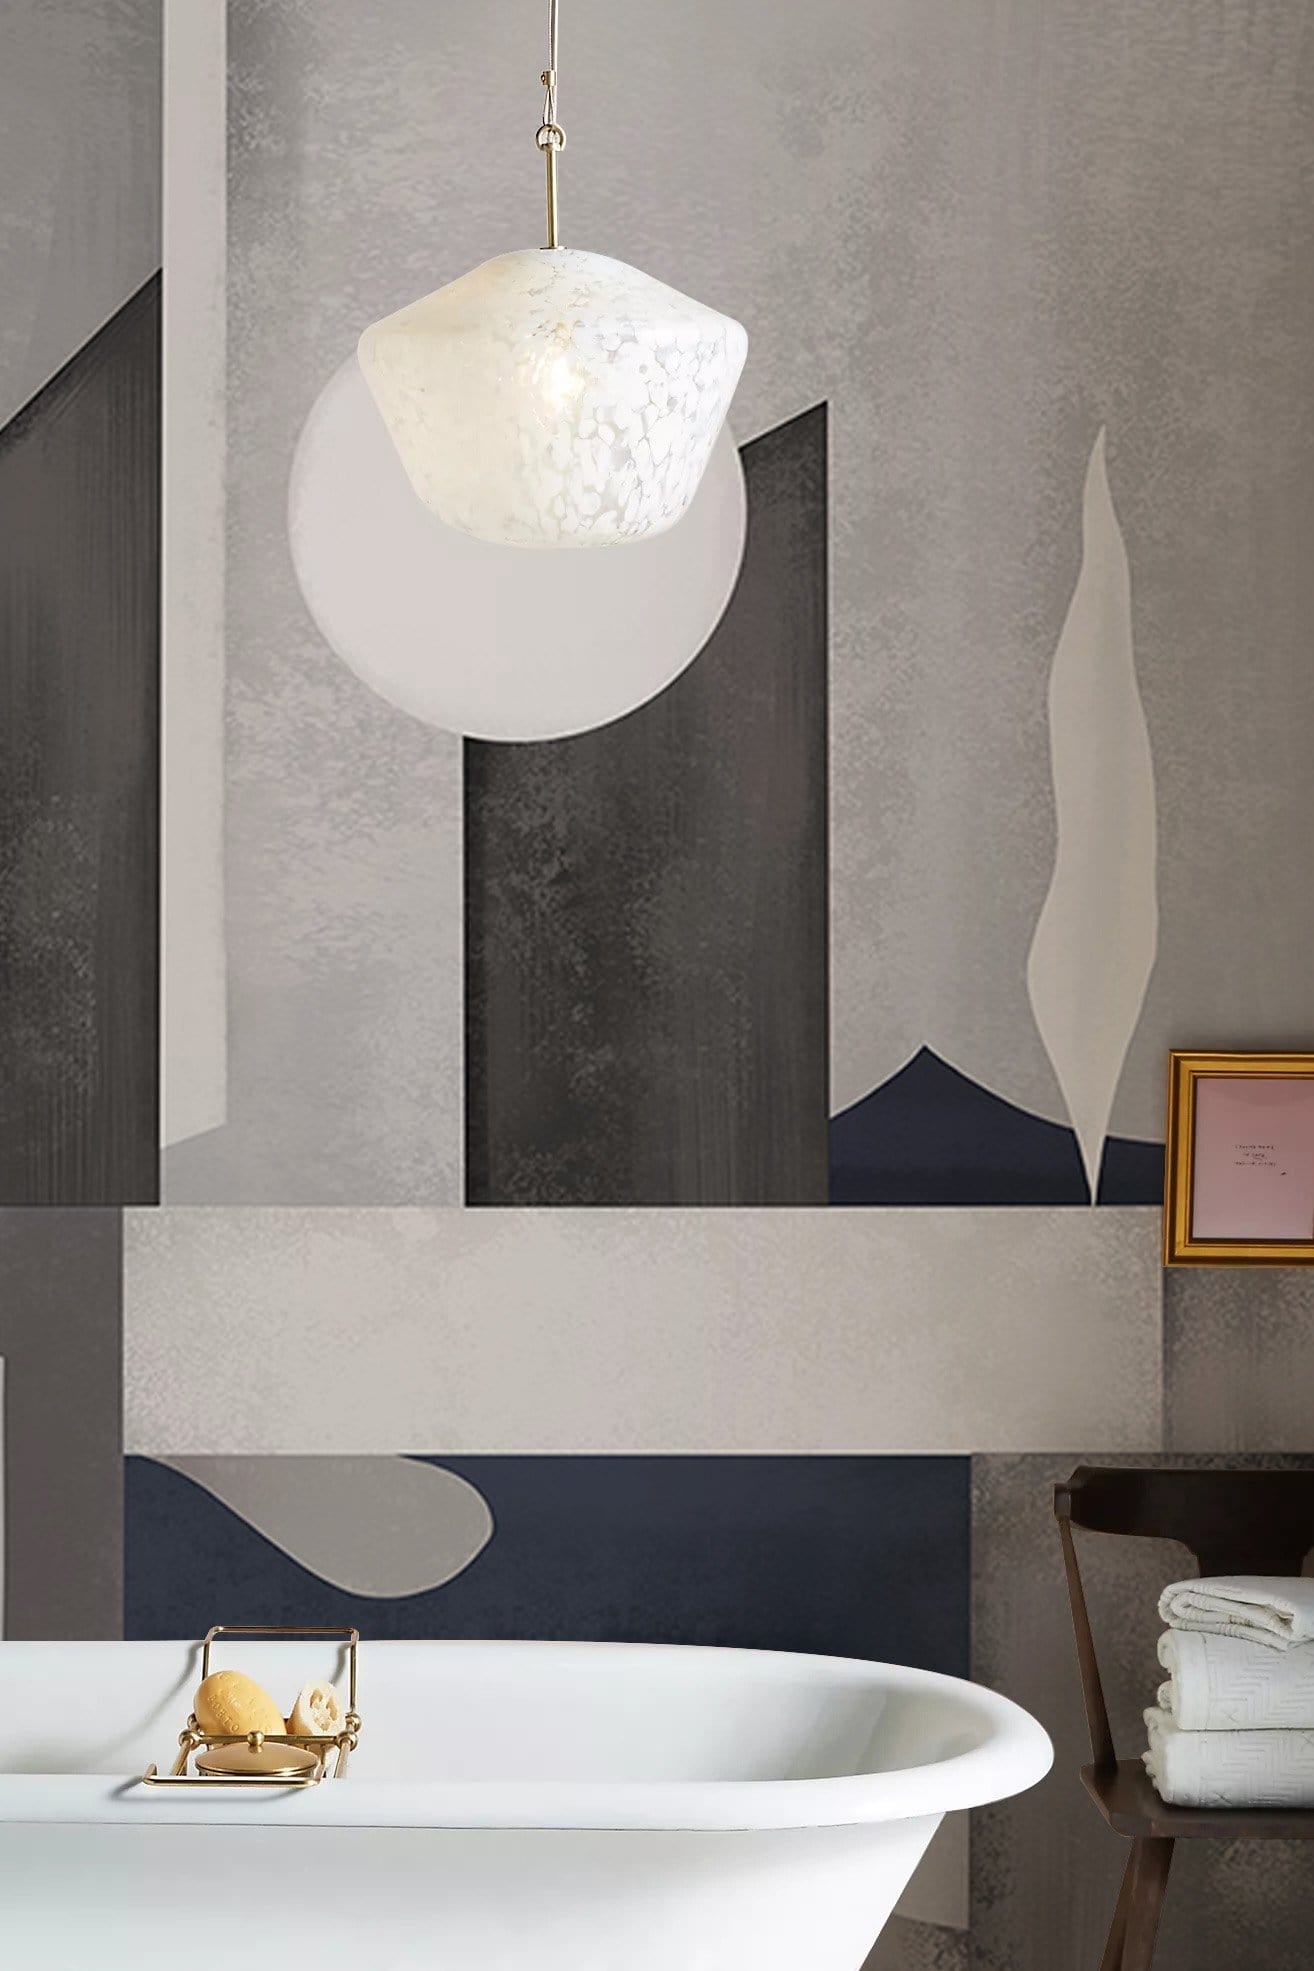 Wallpaper mural with a grey geometric pattern, perfect for use as bathroom decor.